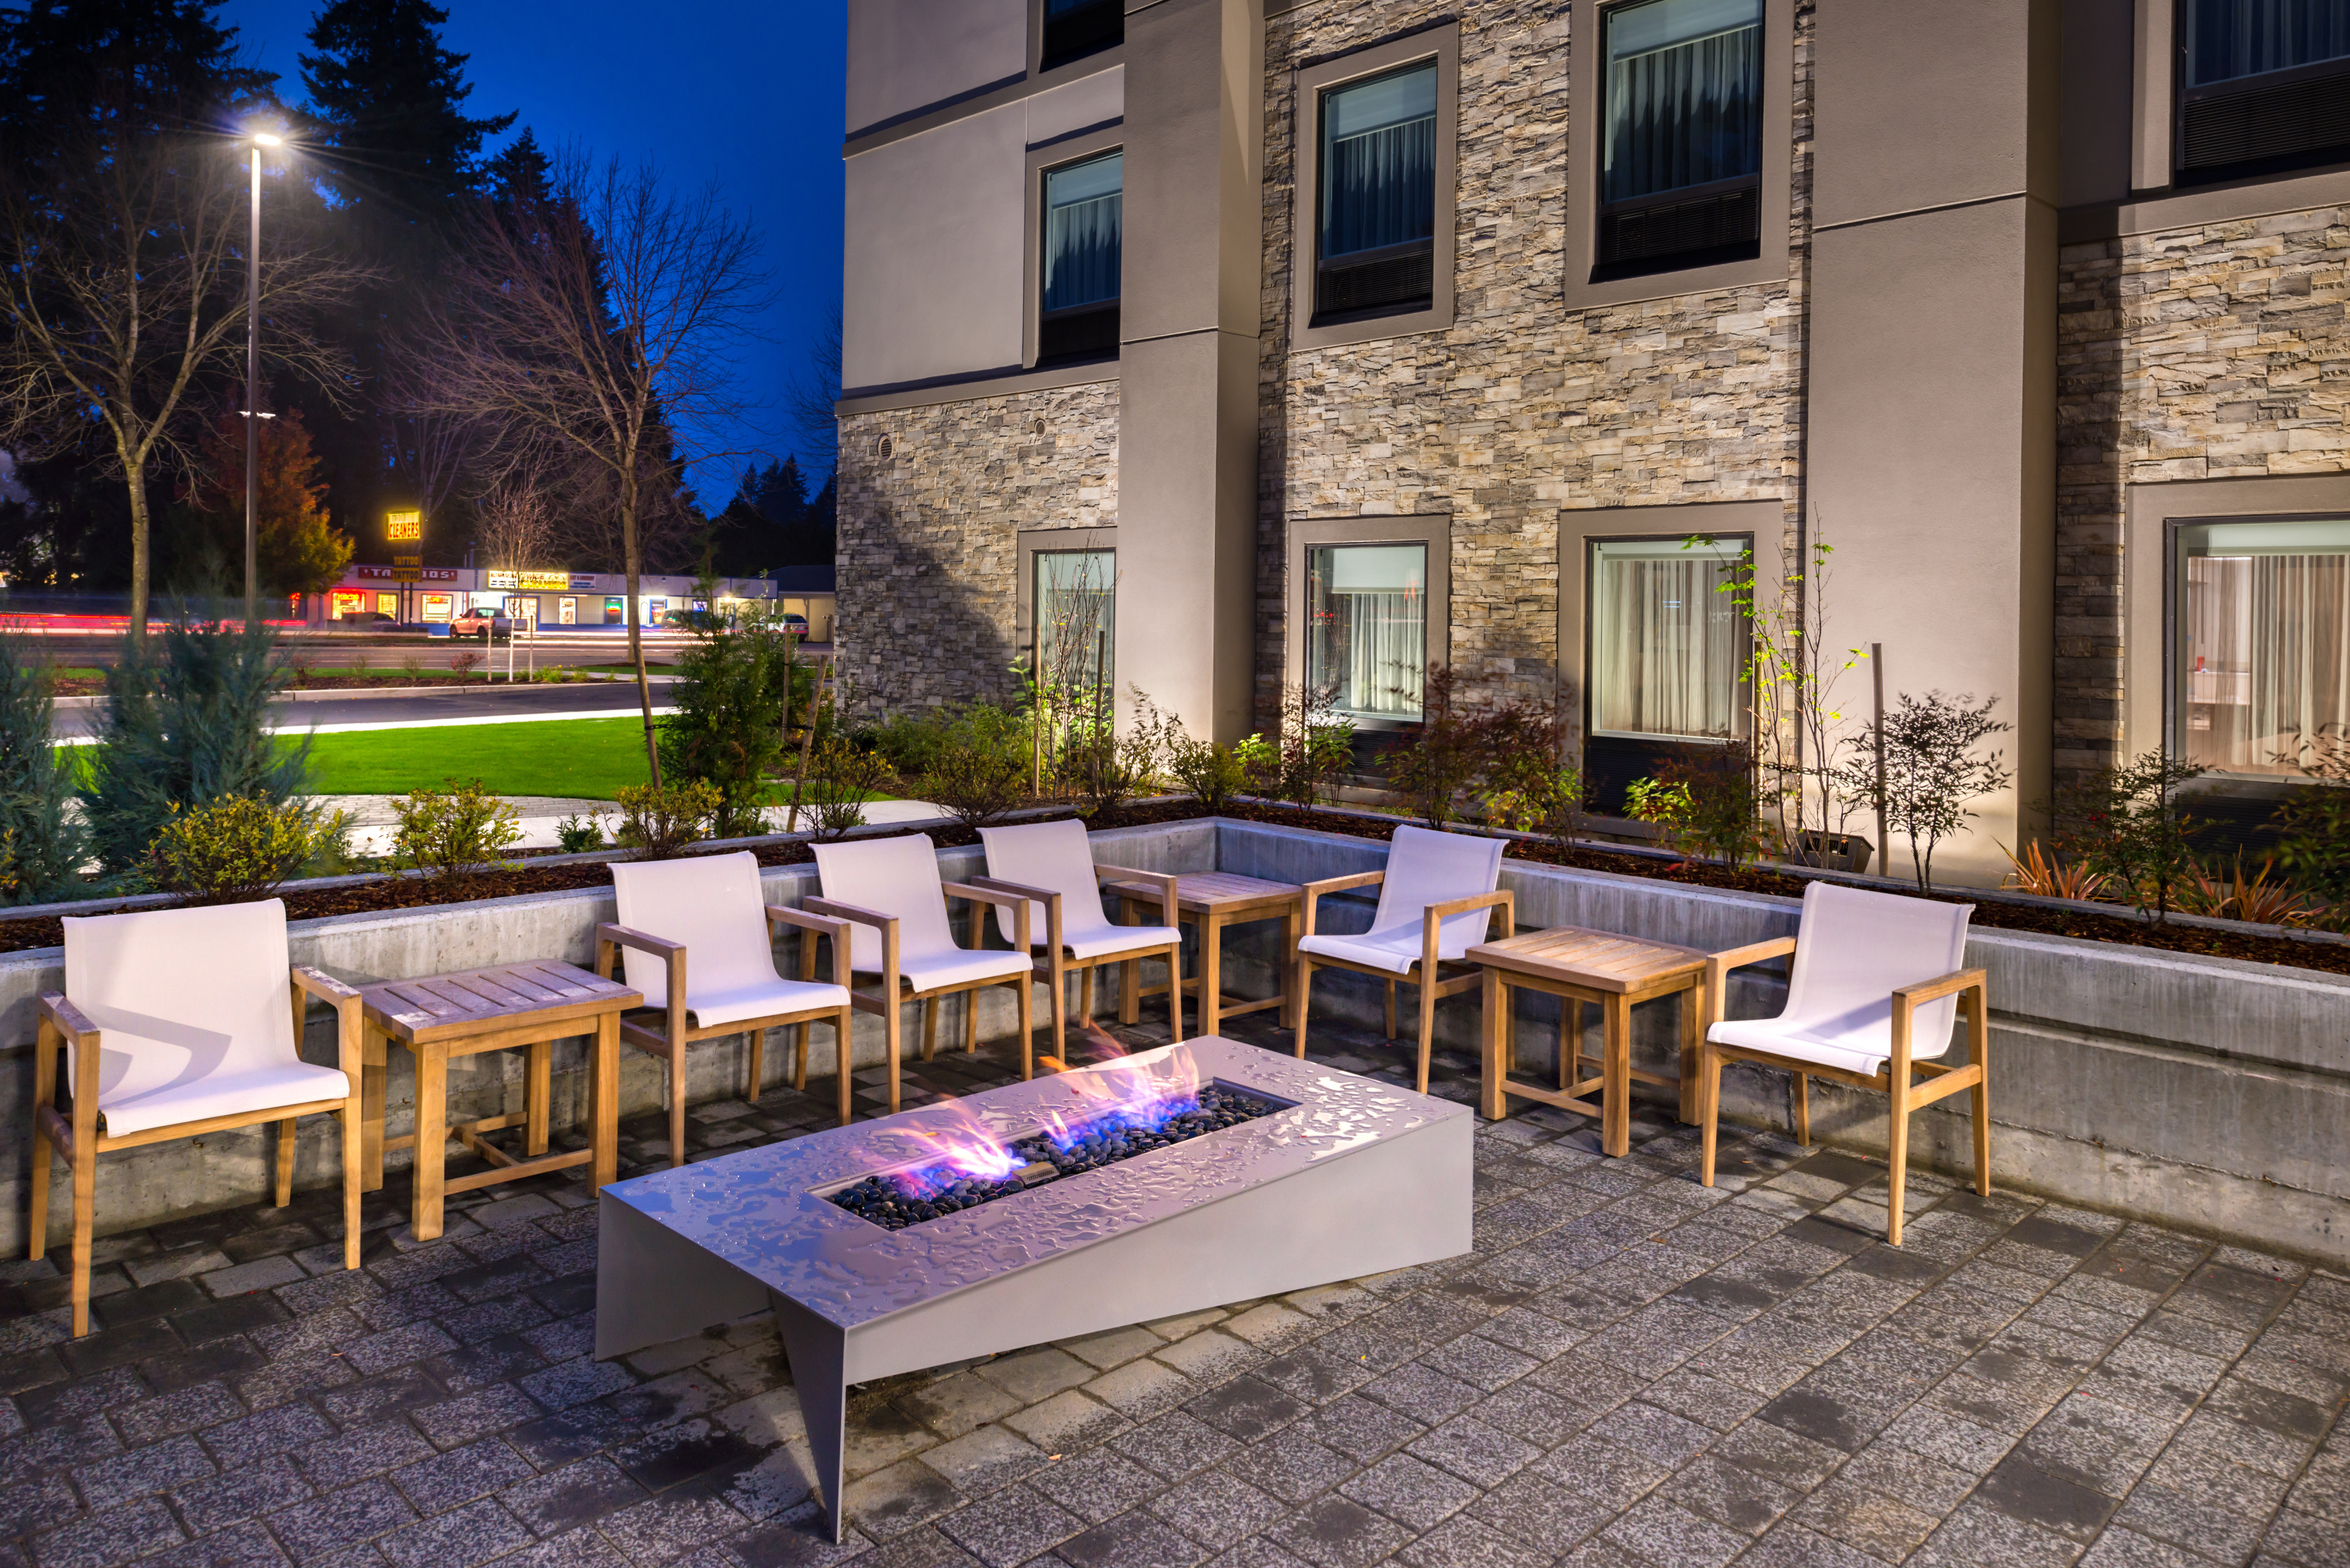 Tables and Chairs Around Fire Pit on Patio and Illuminated Hotel Exterior at Night